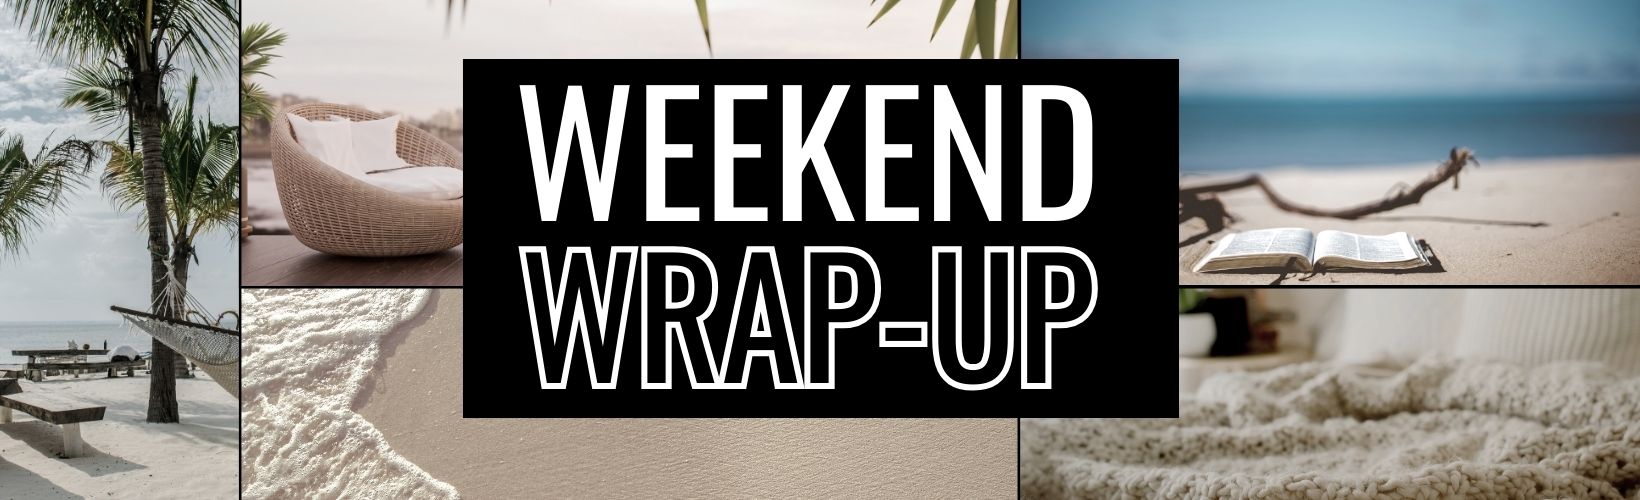 Weekend Wrap-Up: How to Make Your Home Cozy and Festive